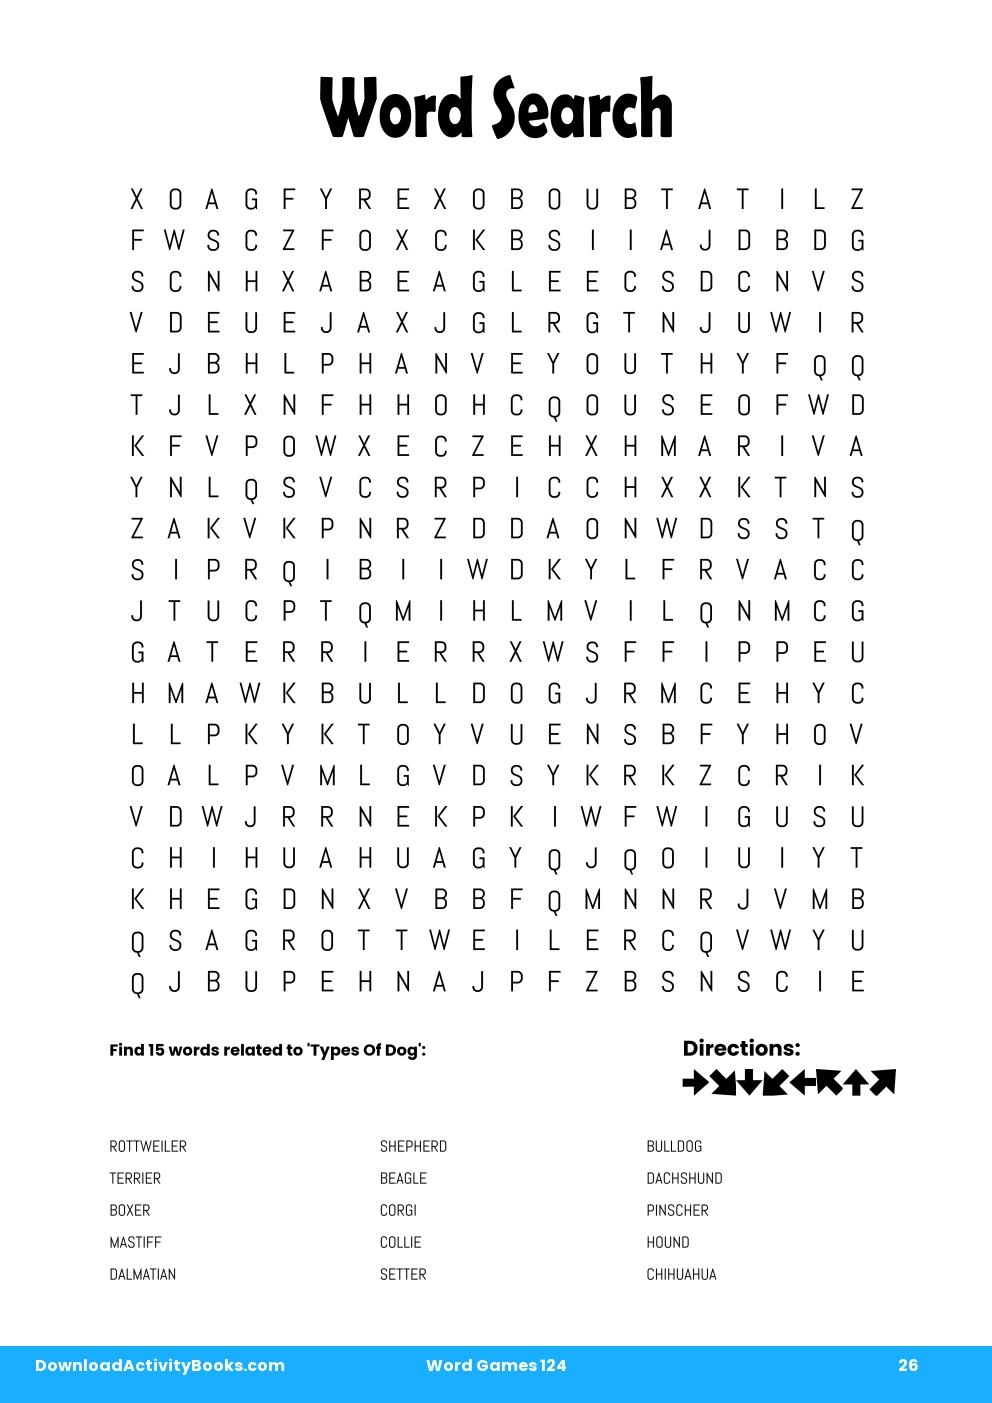 Word Search in Word Games 124